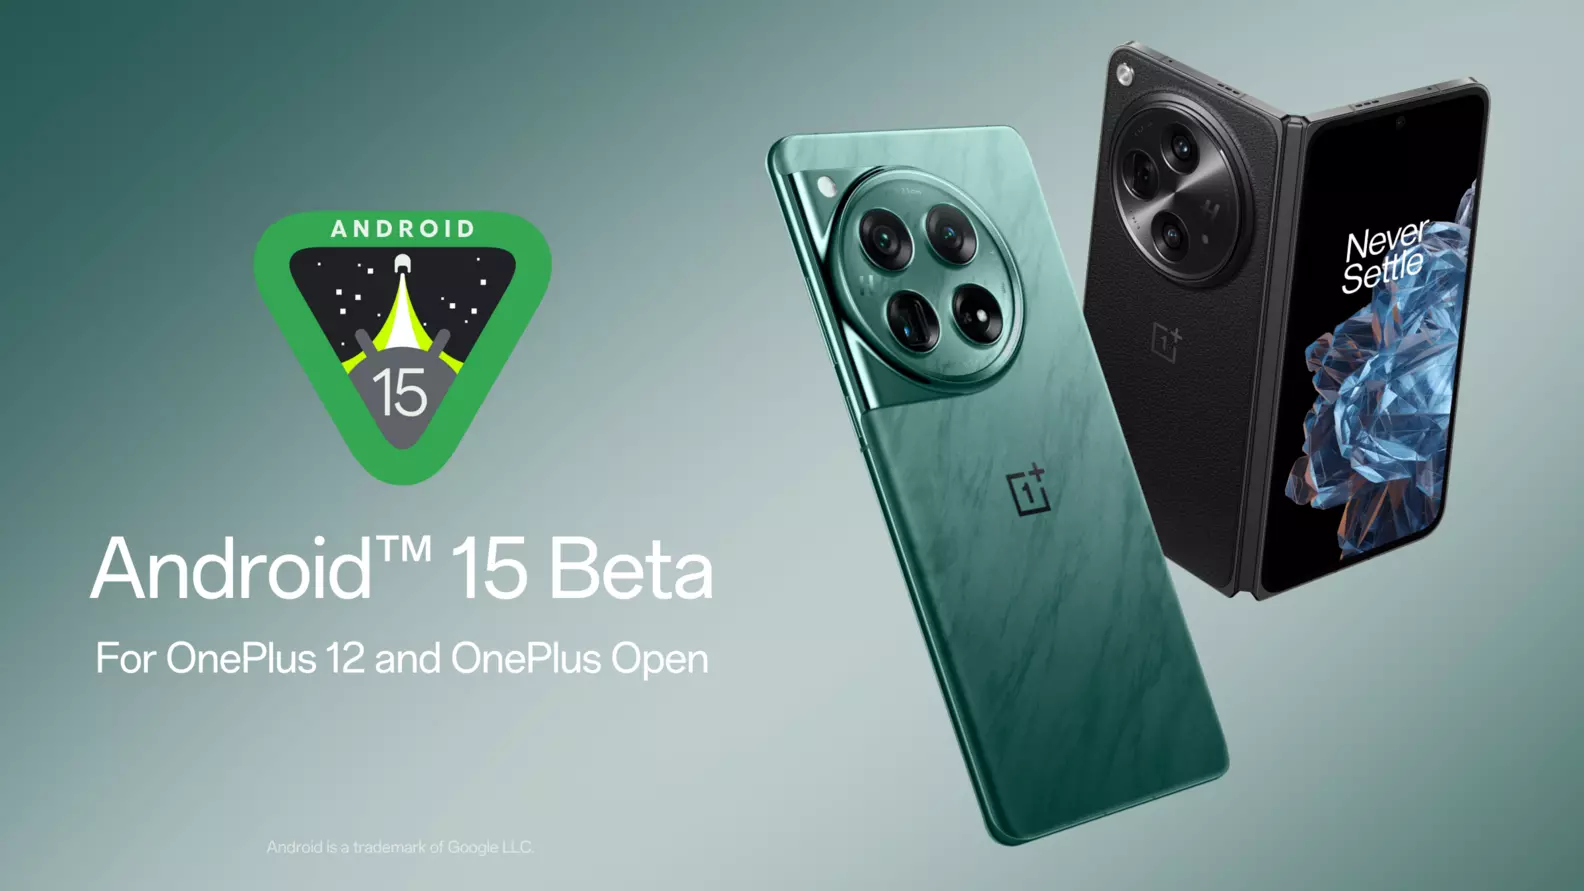 OnePlus 12 and OnePlus Open receive Android 15 Beta update, download links here - Gizmochina